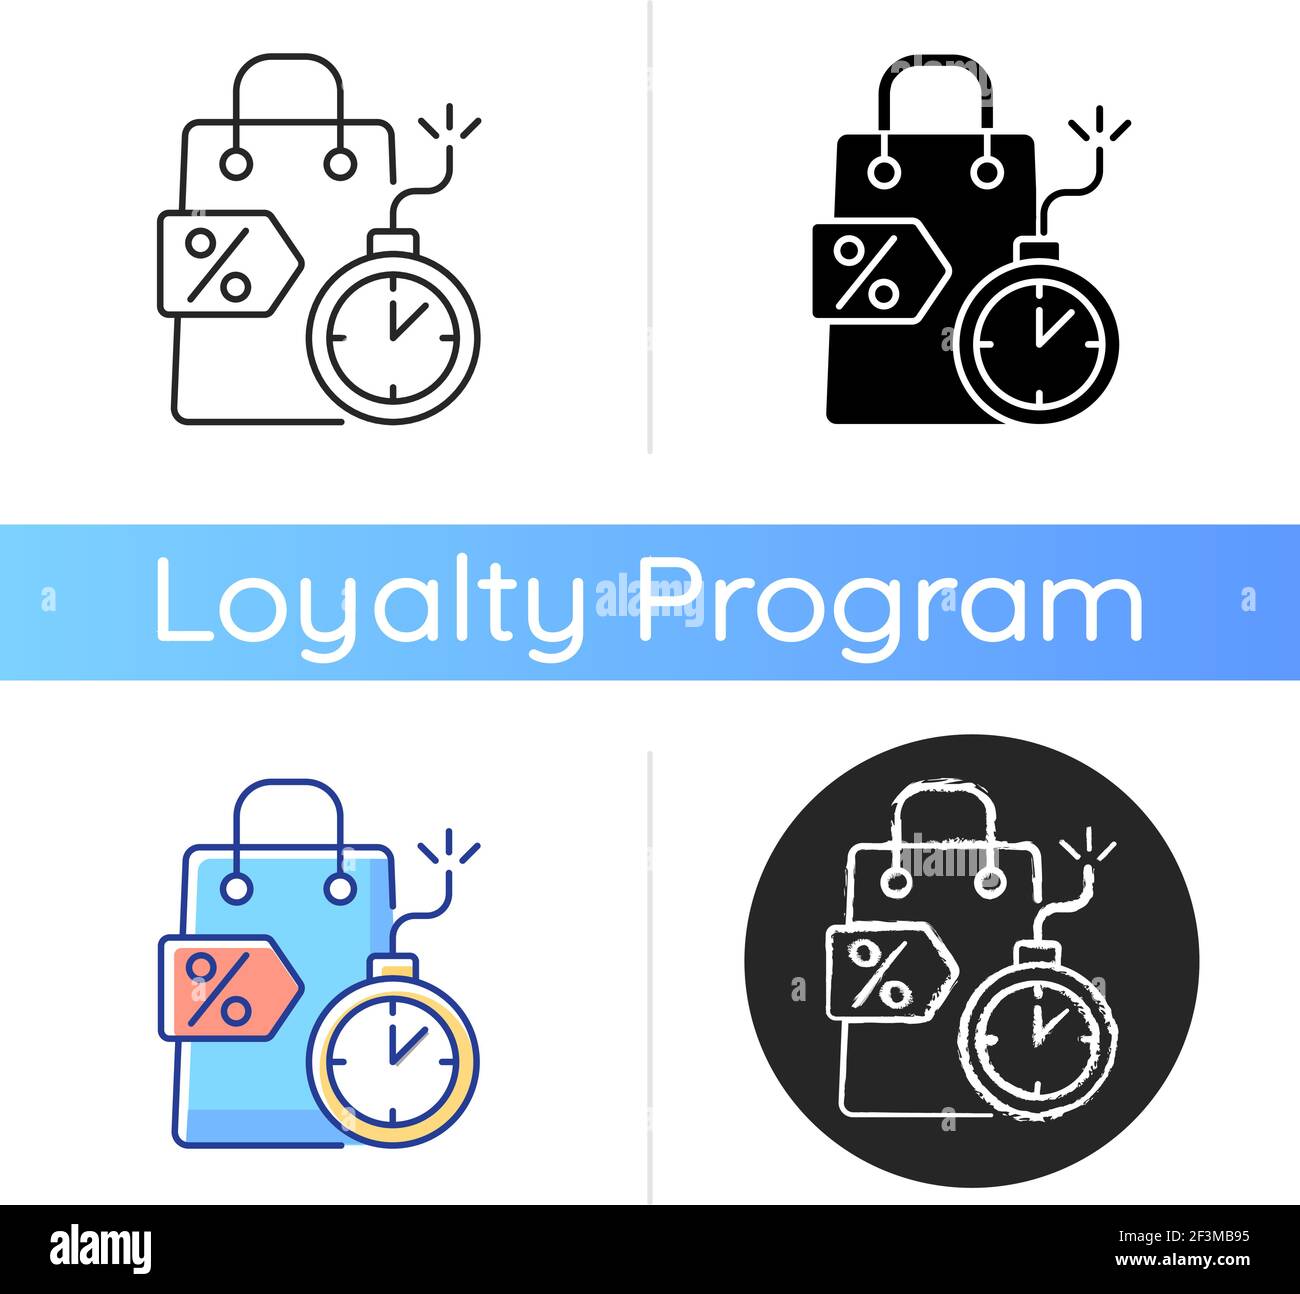 Limited-time offer icon Stock Vector